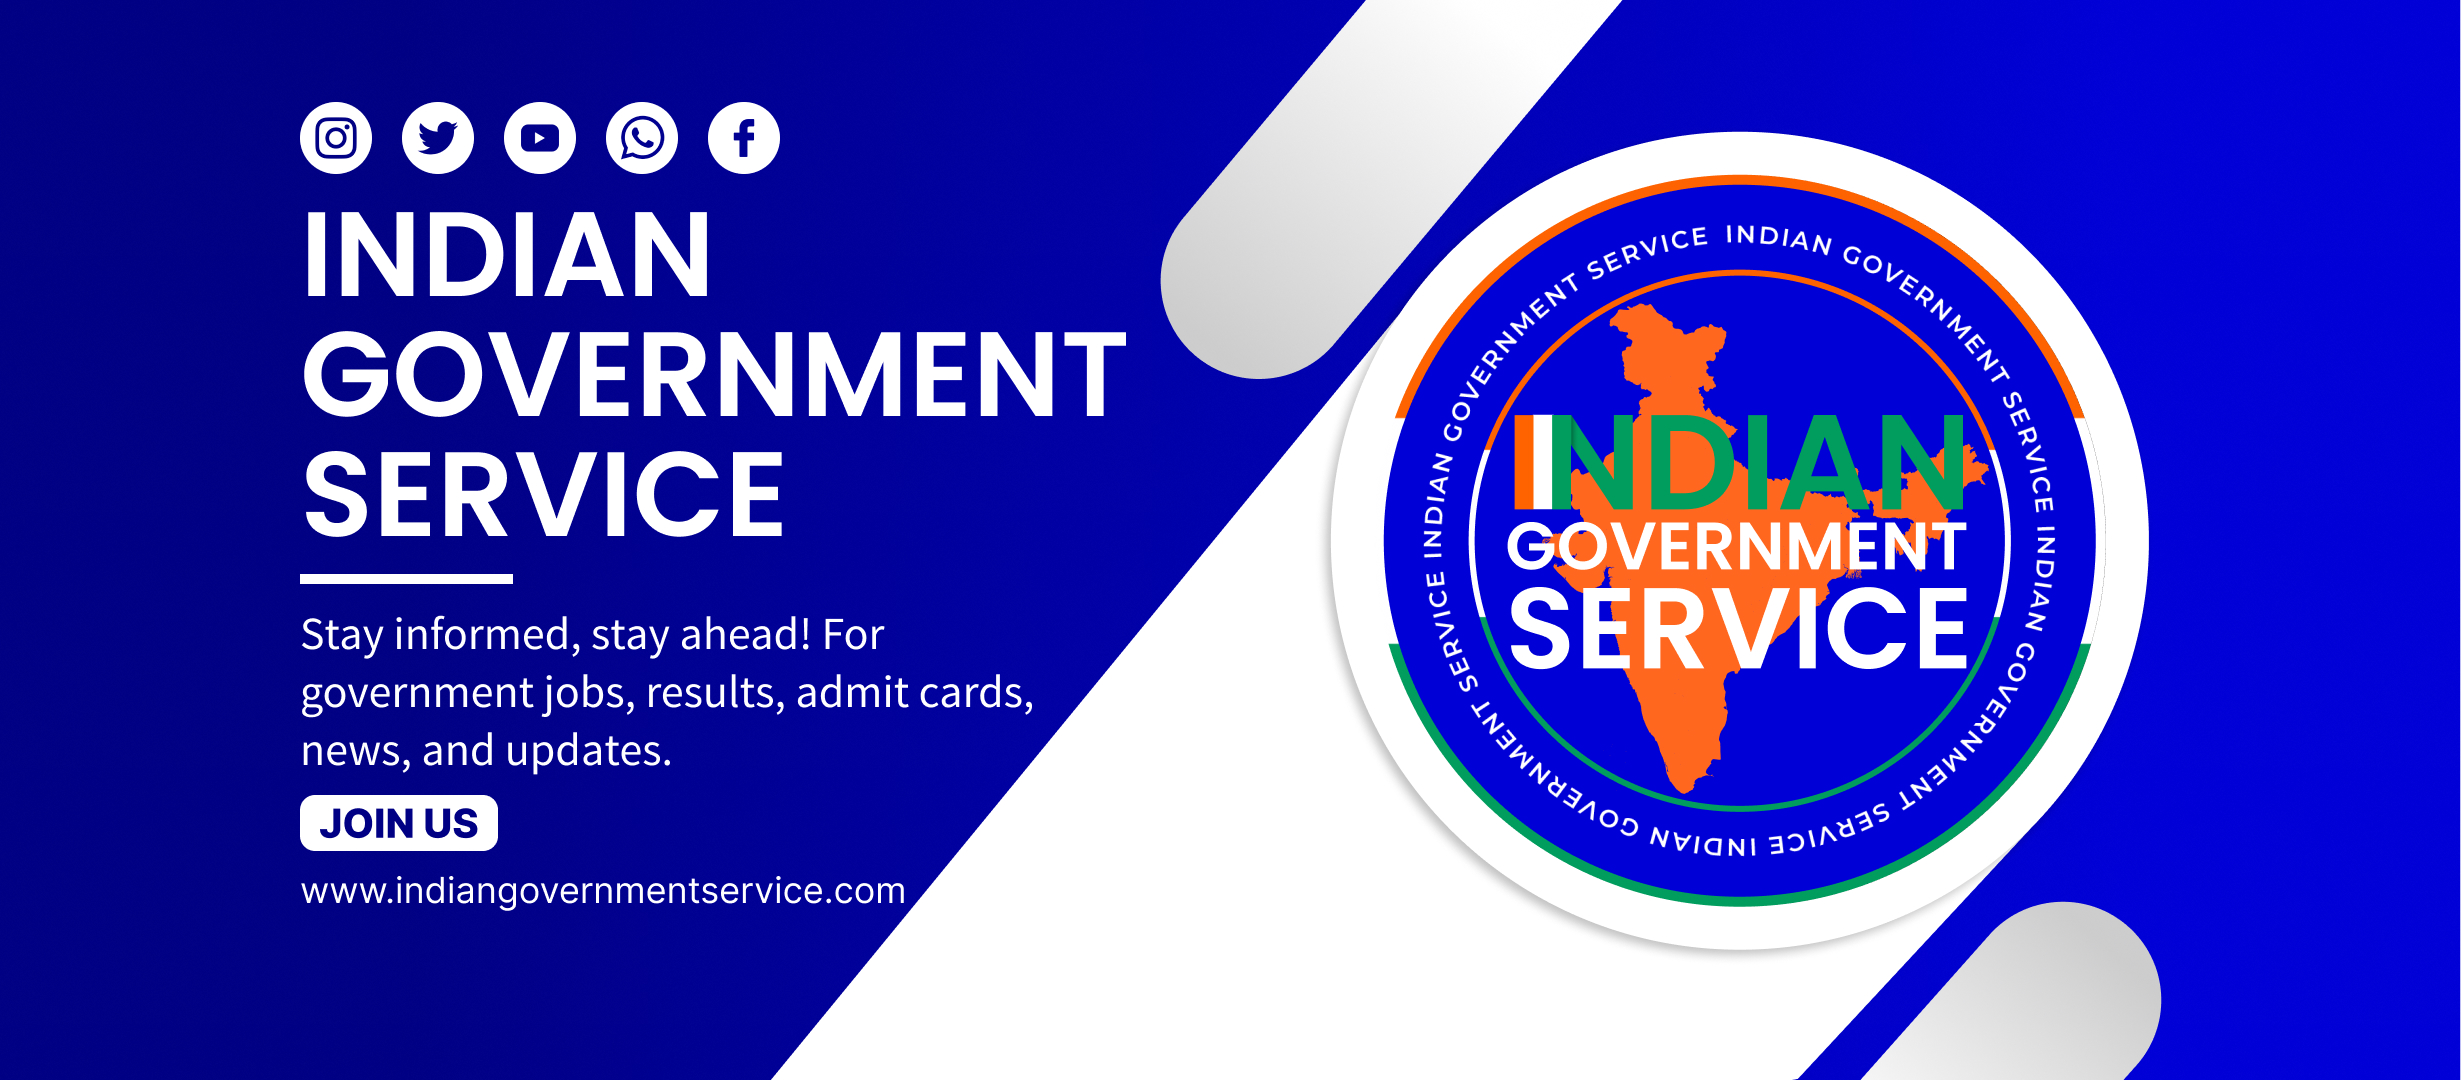 Indian Government Service